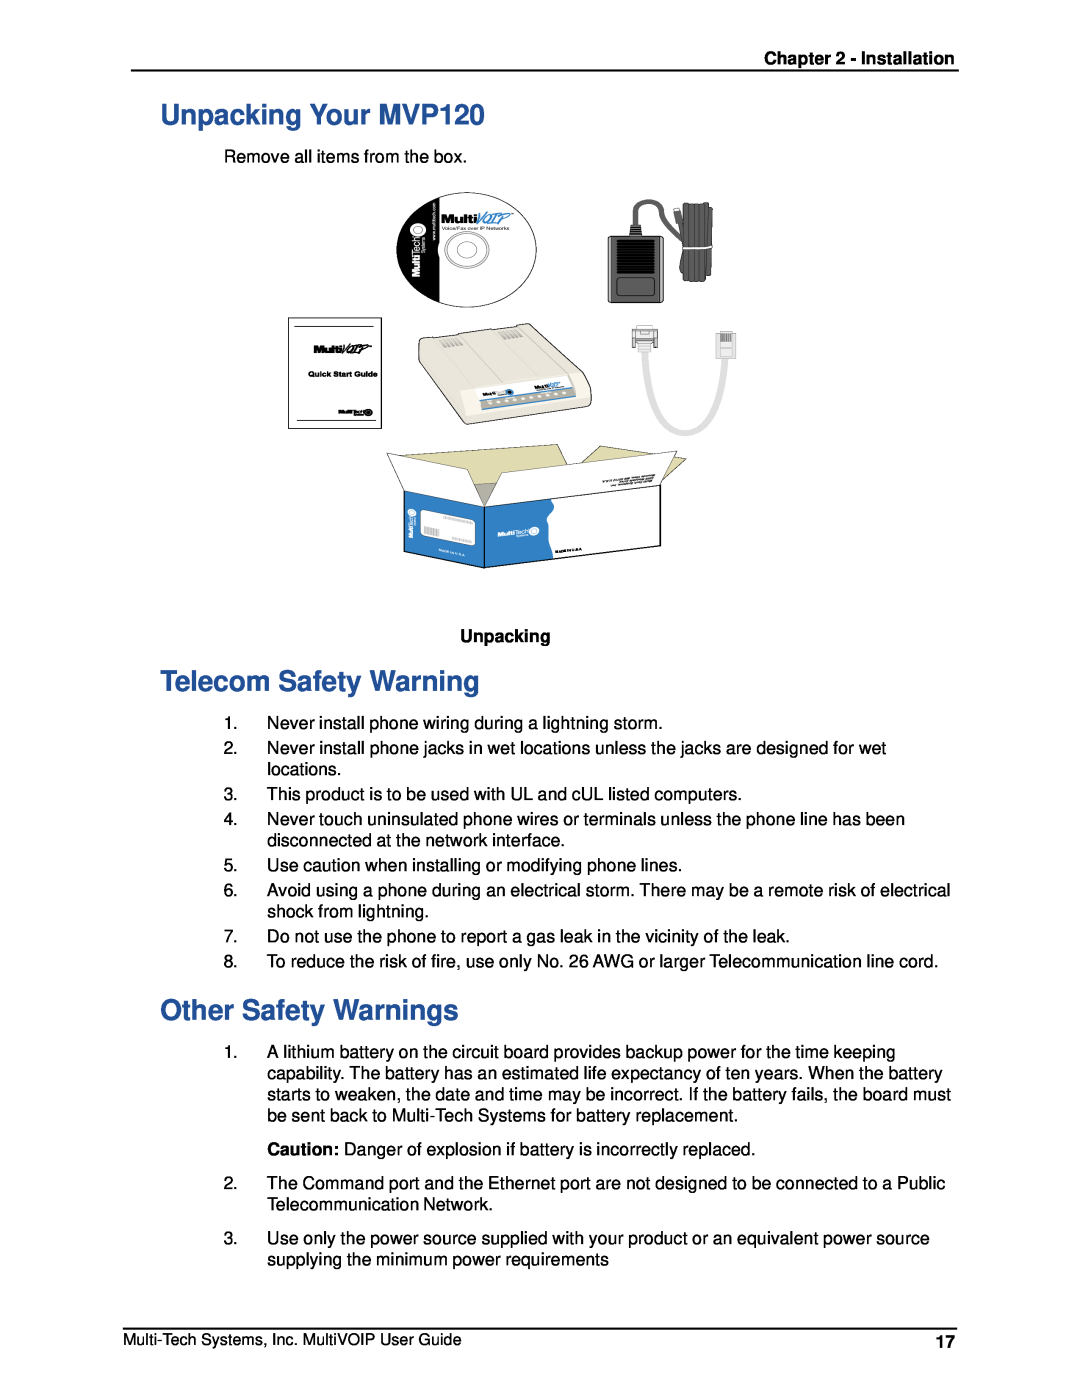 Multi-Tech Systems manual Unpacking Your MVP120, Telecom Safety Warning, Other Safety Warnings, Installation 